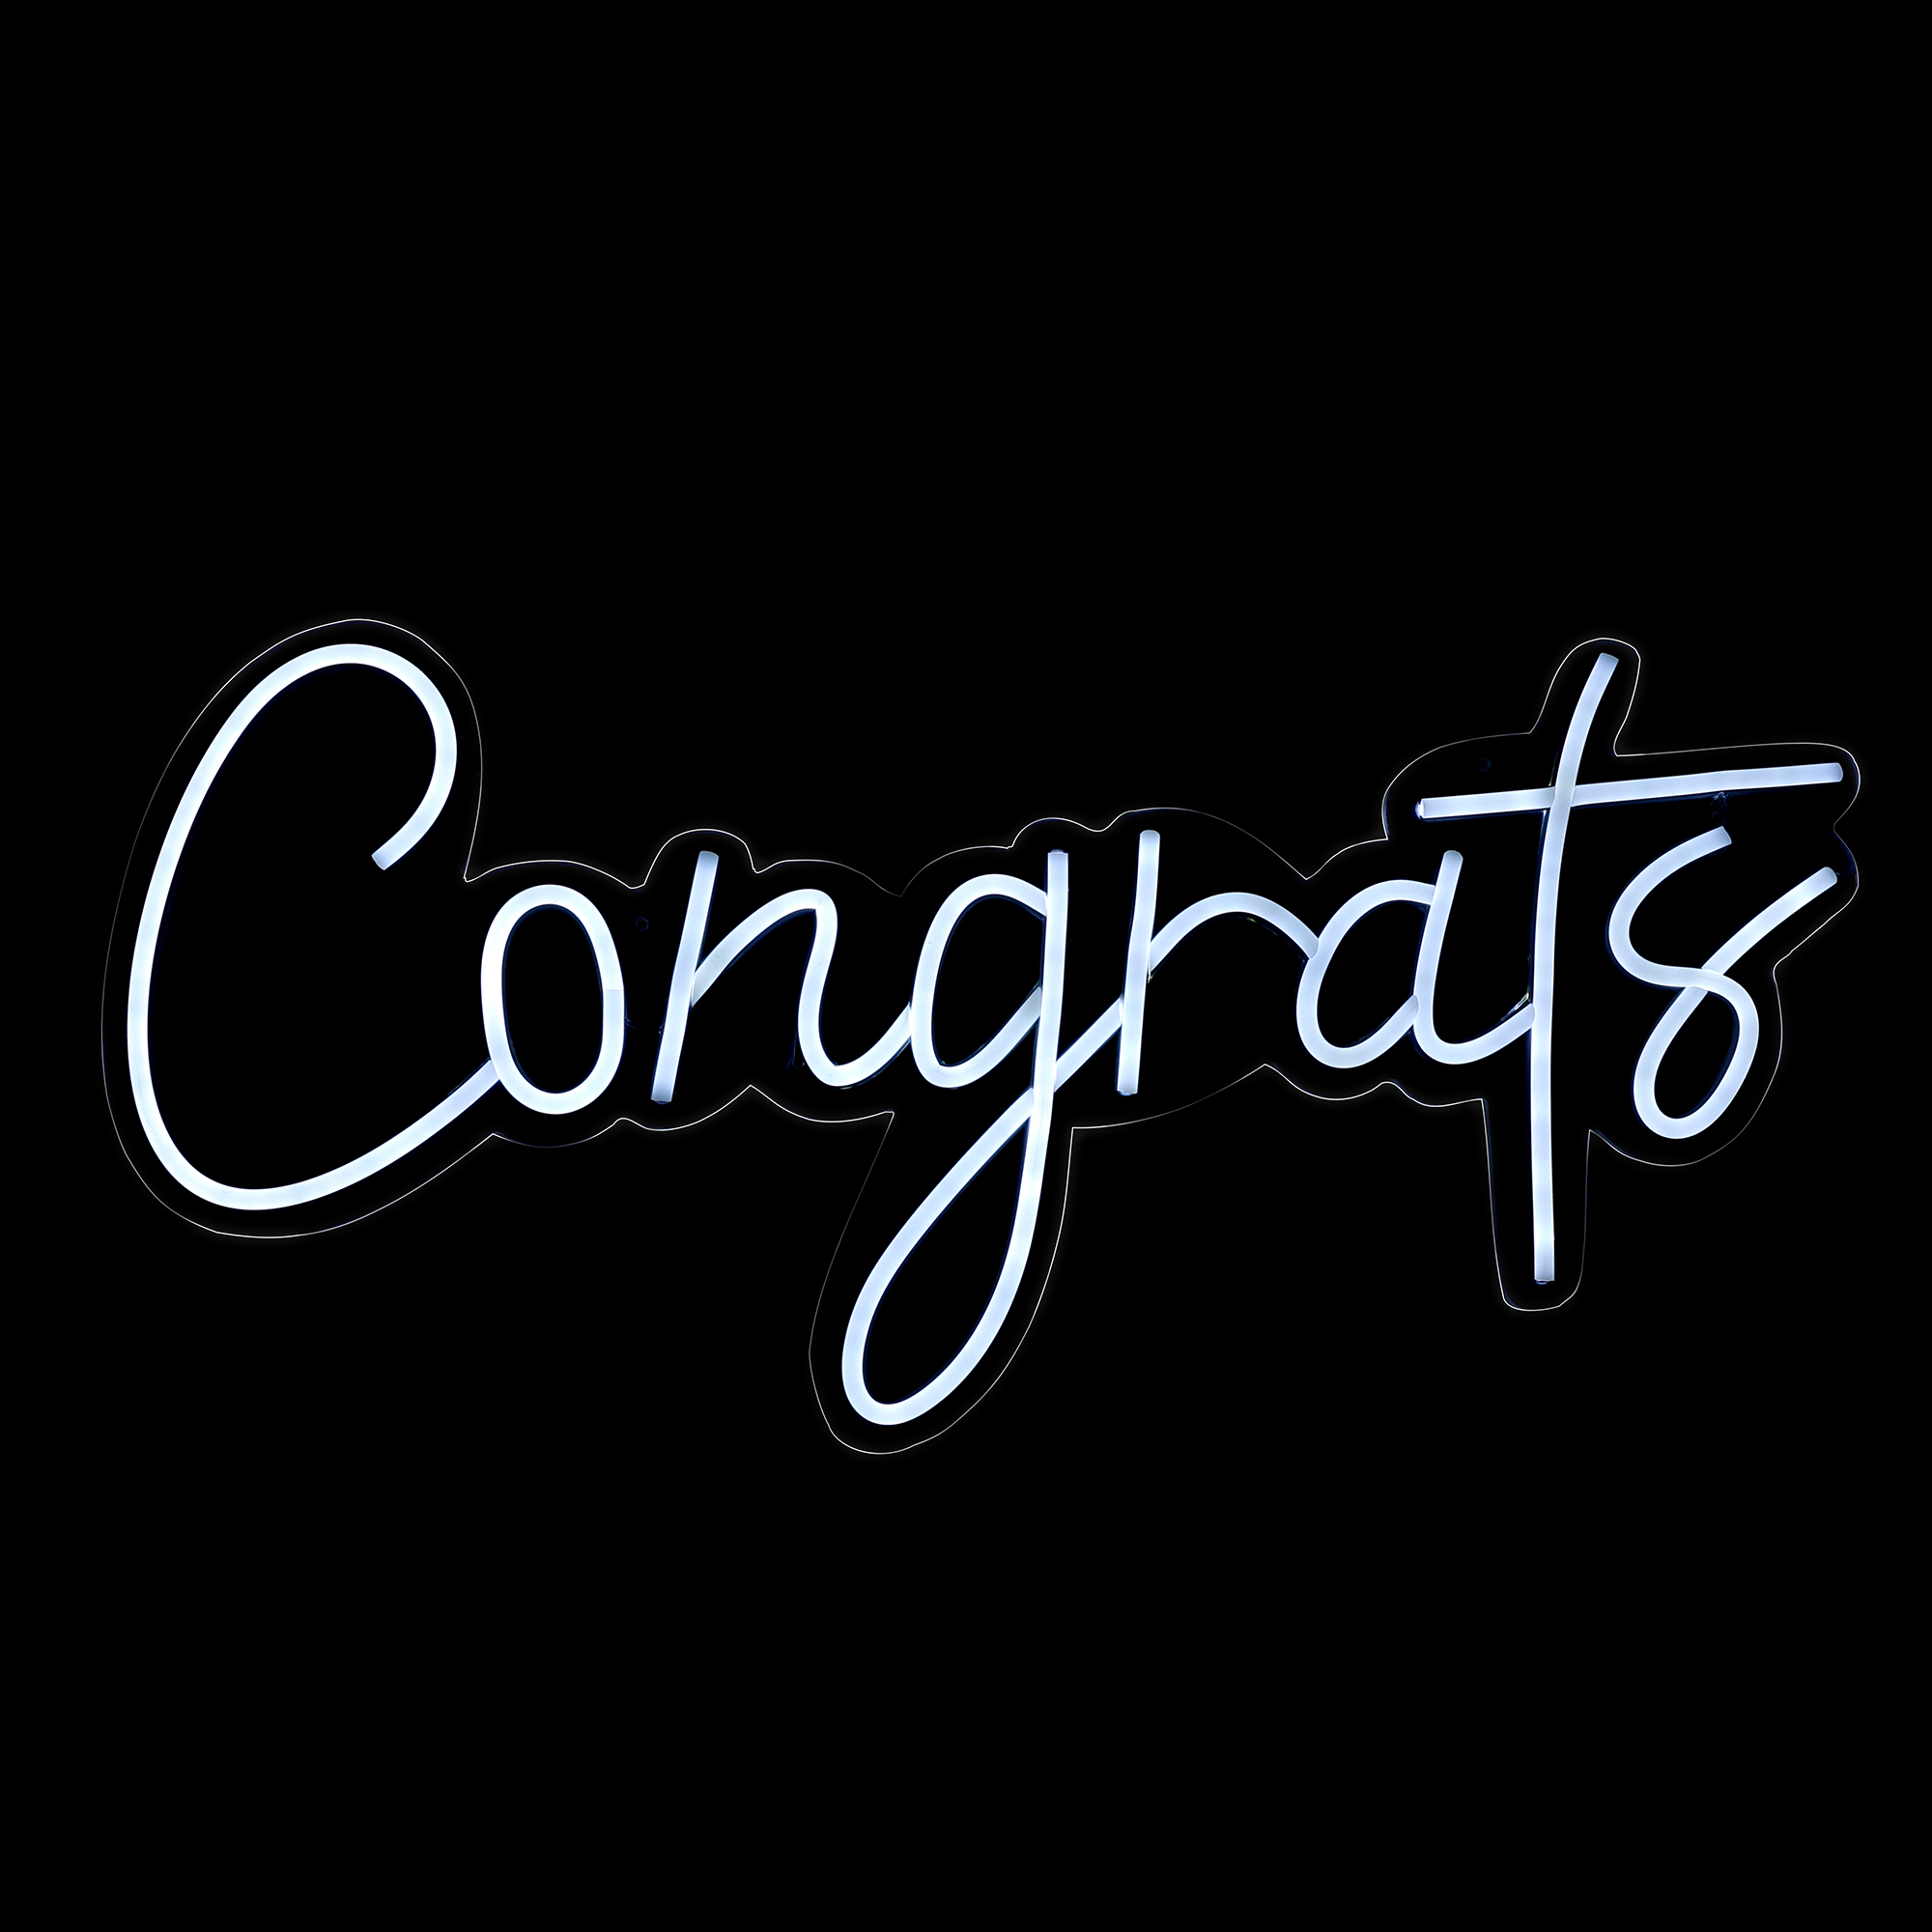 "Congrats" Neon Light Sign With Hanging Chain 23“